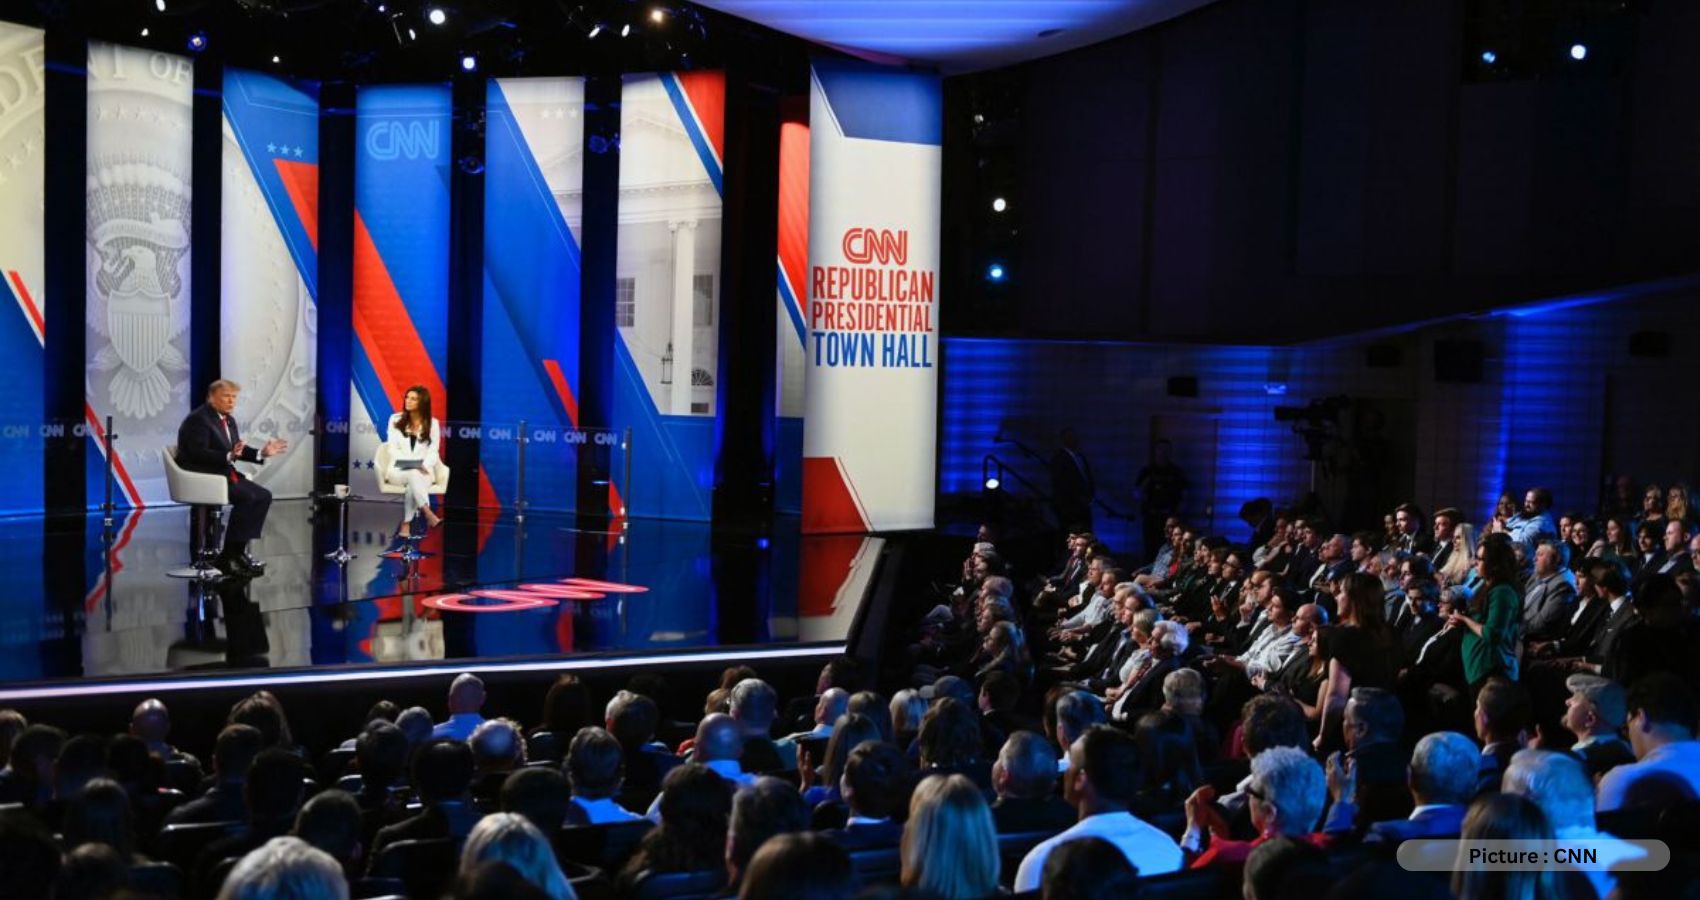 In CNN Town Hall, Trump’s Hold On Conservative Voters Highlighted